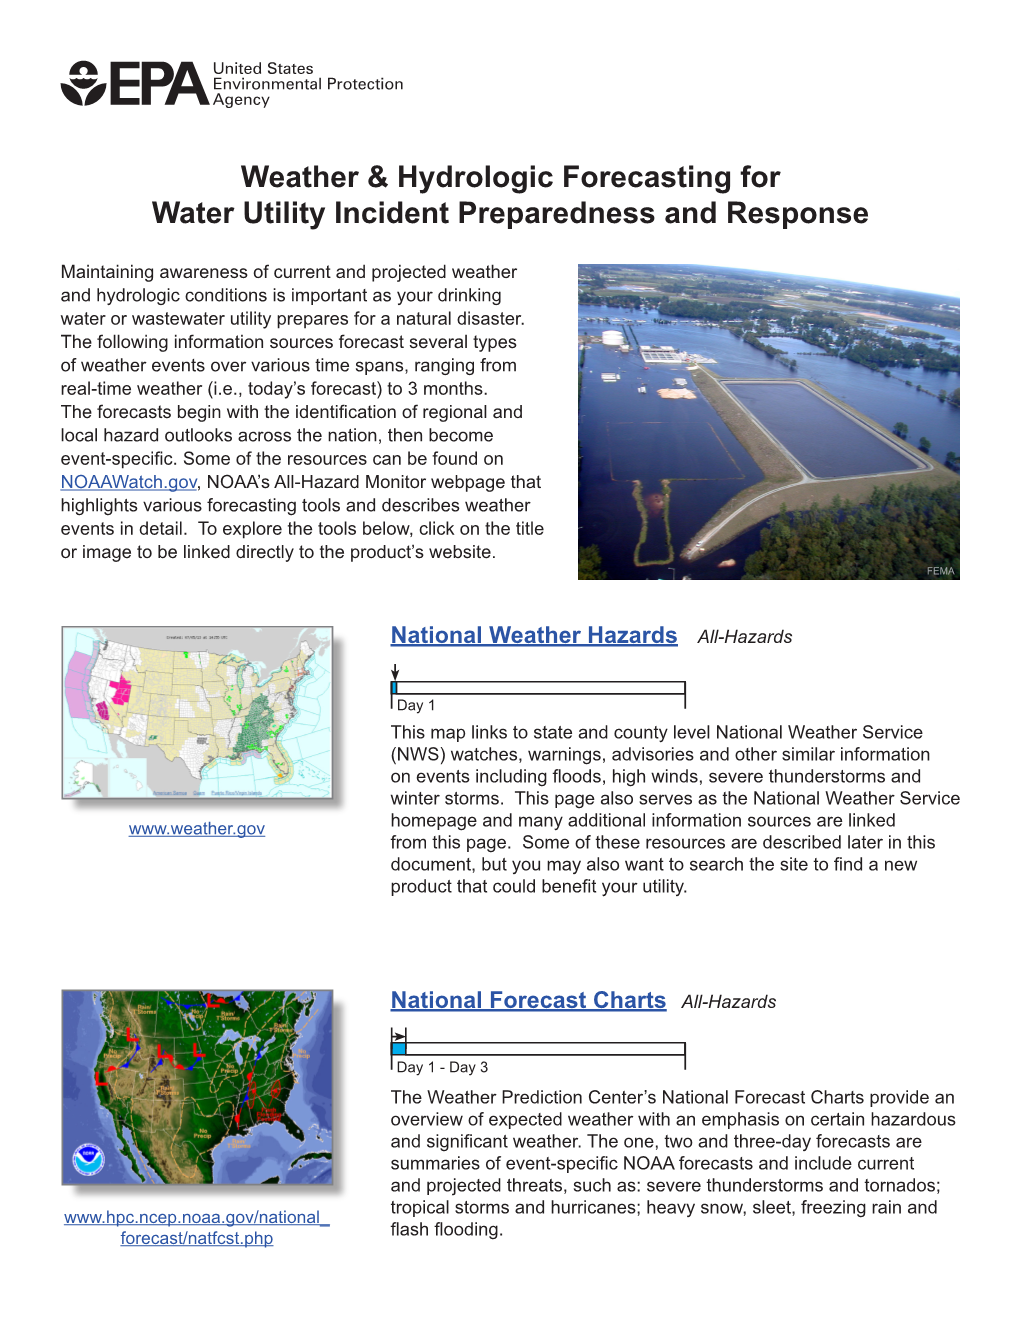 Weather & Hydrologic Forecasting for Water Utility Incident Preparedness